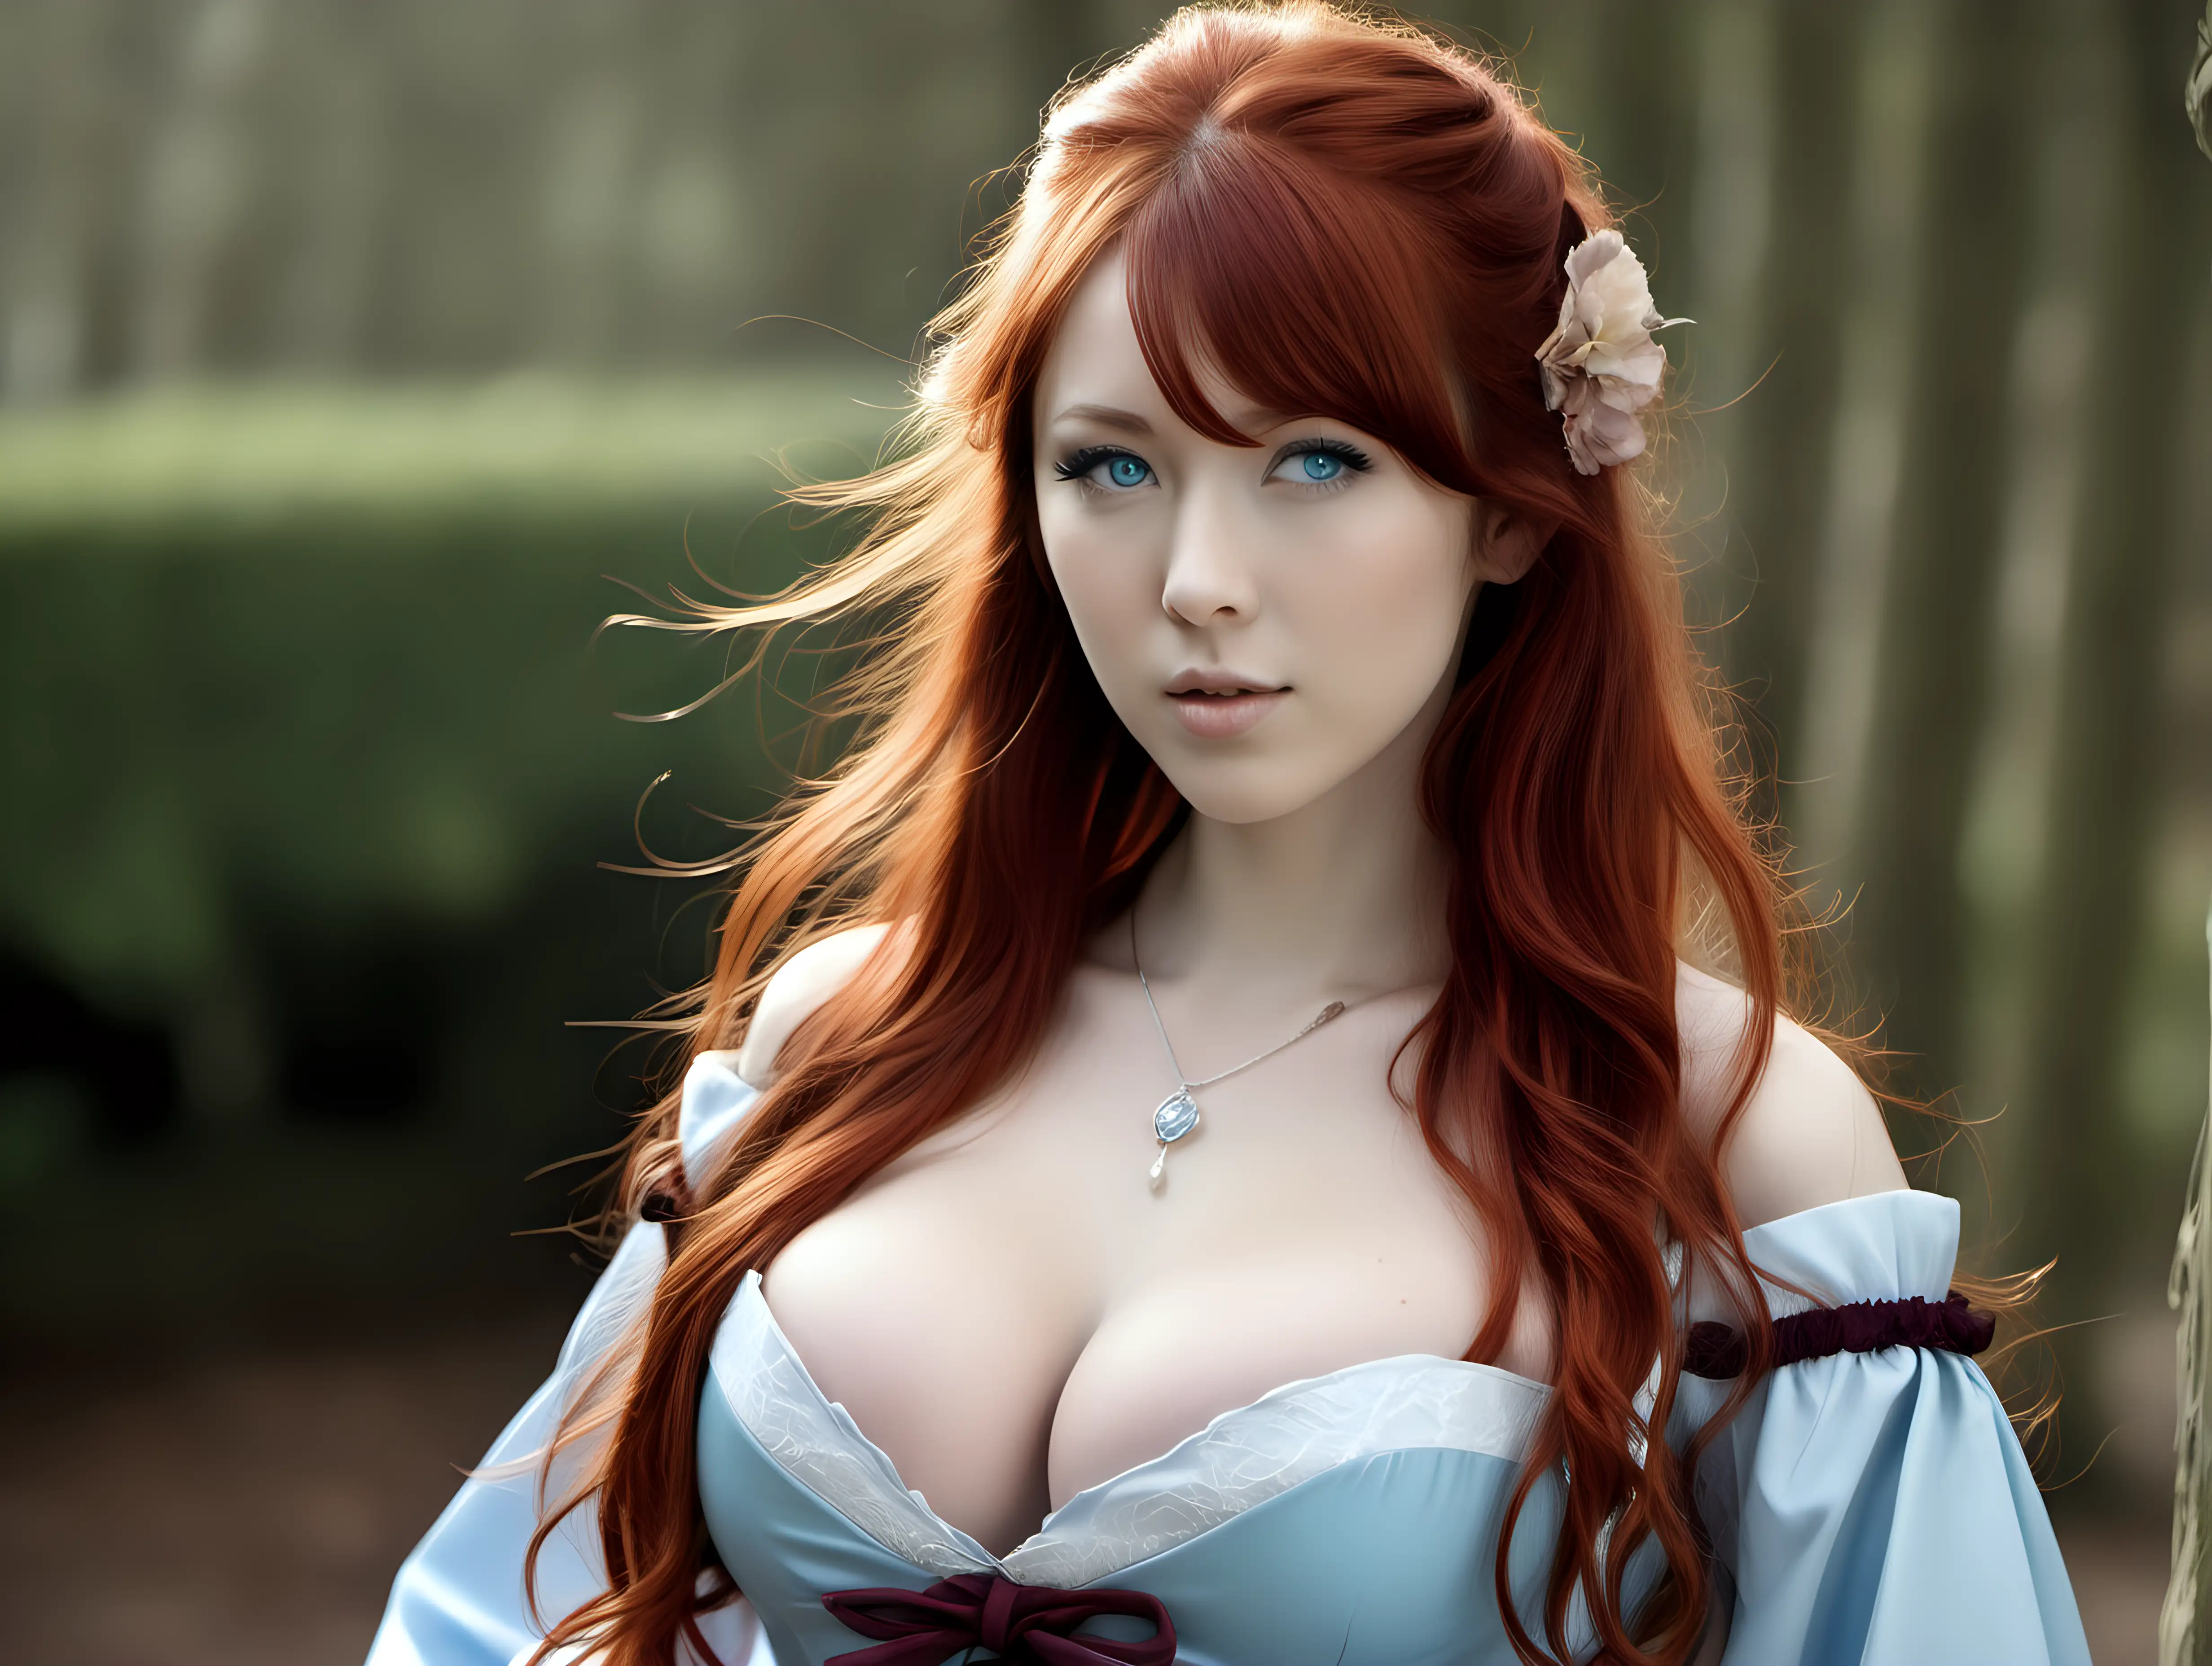 Lyra Stormsword, a beautiful half-Japanese, half-British woman with long, reddish hair and light blue eyes.  She has C-cup breasts that are covered by her regal dress.
